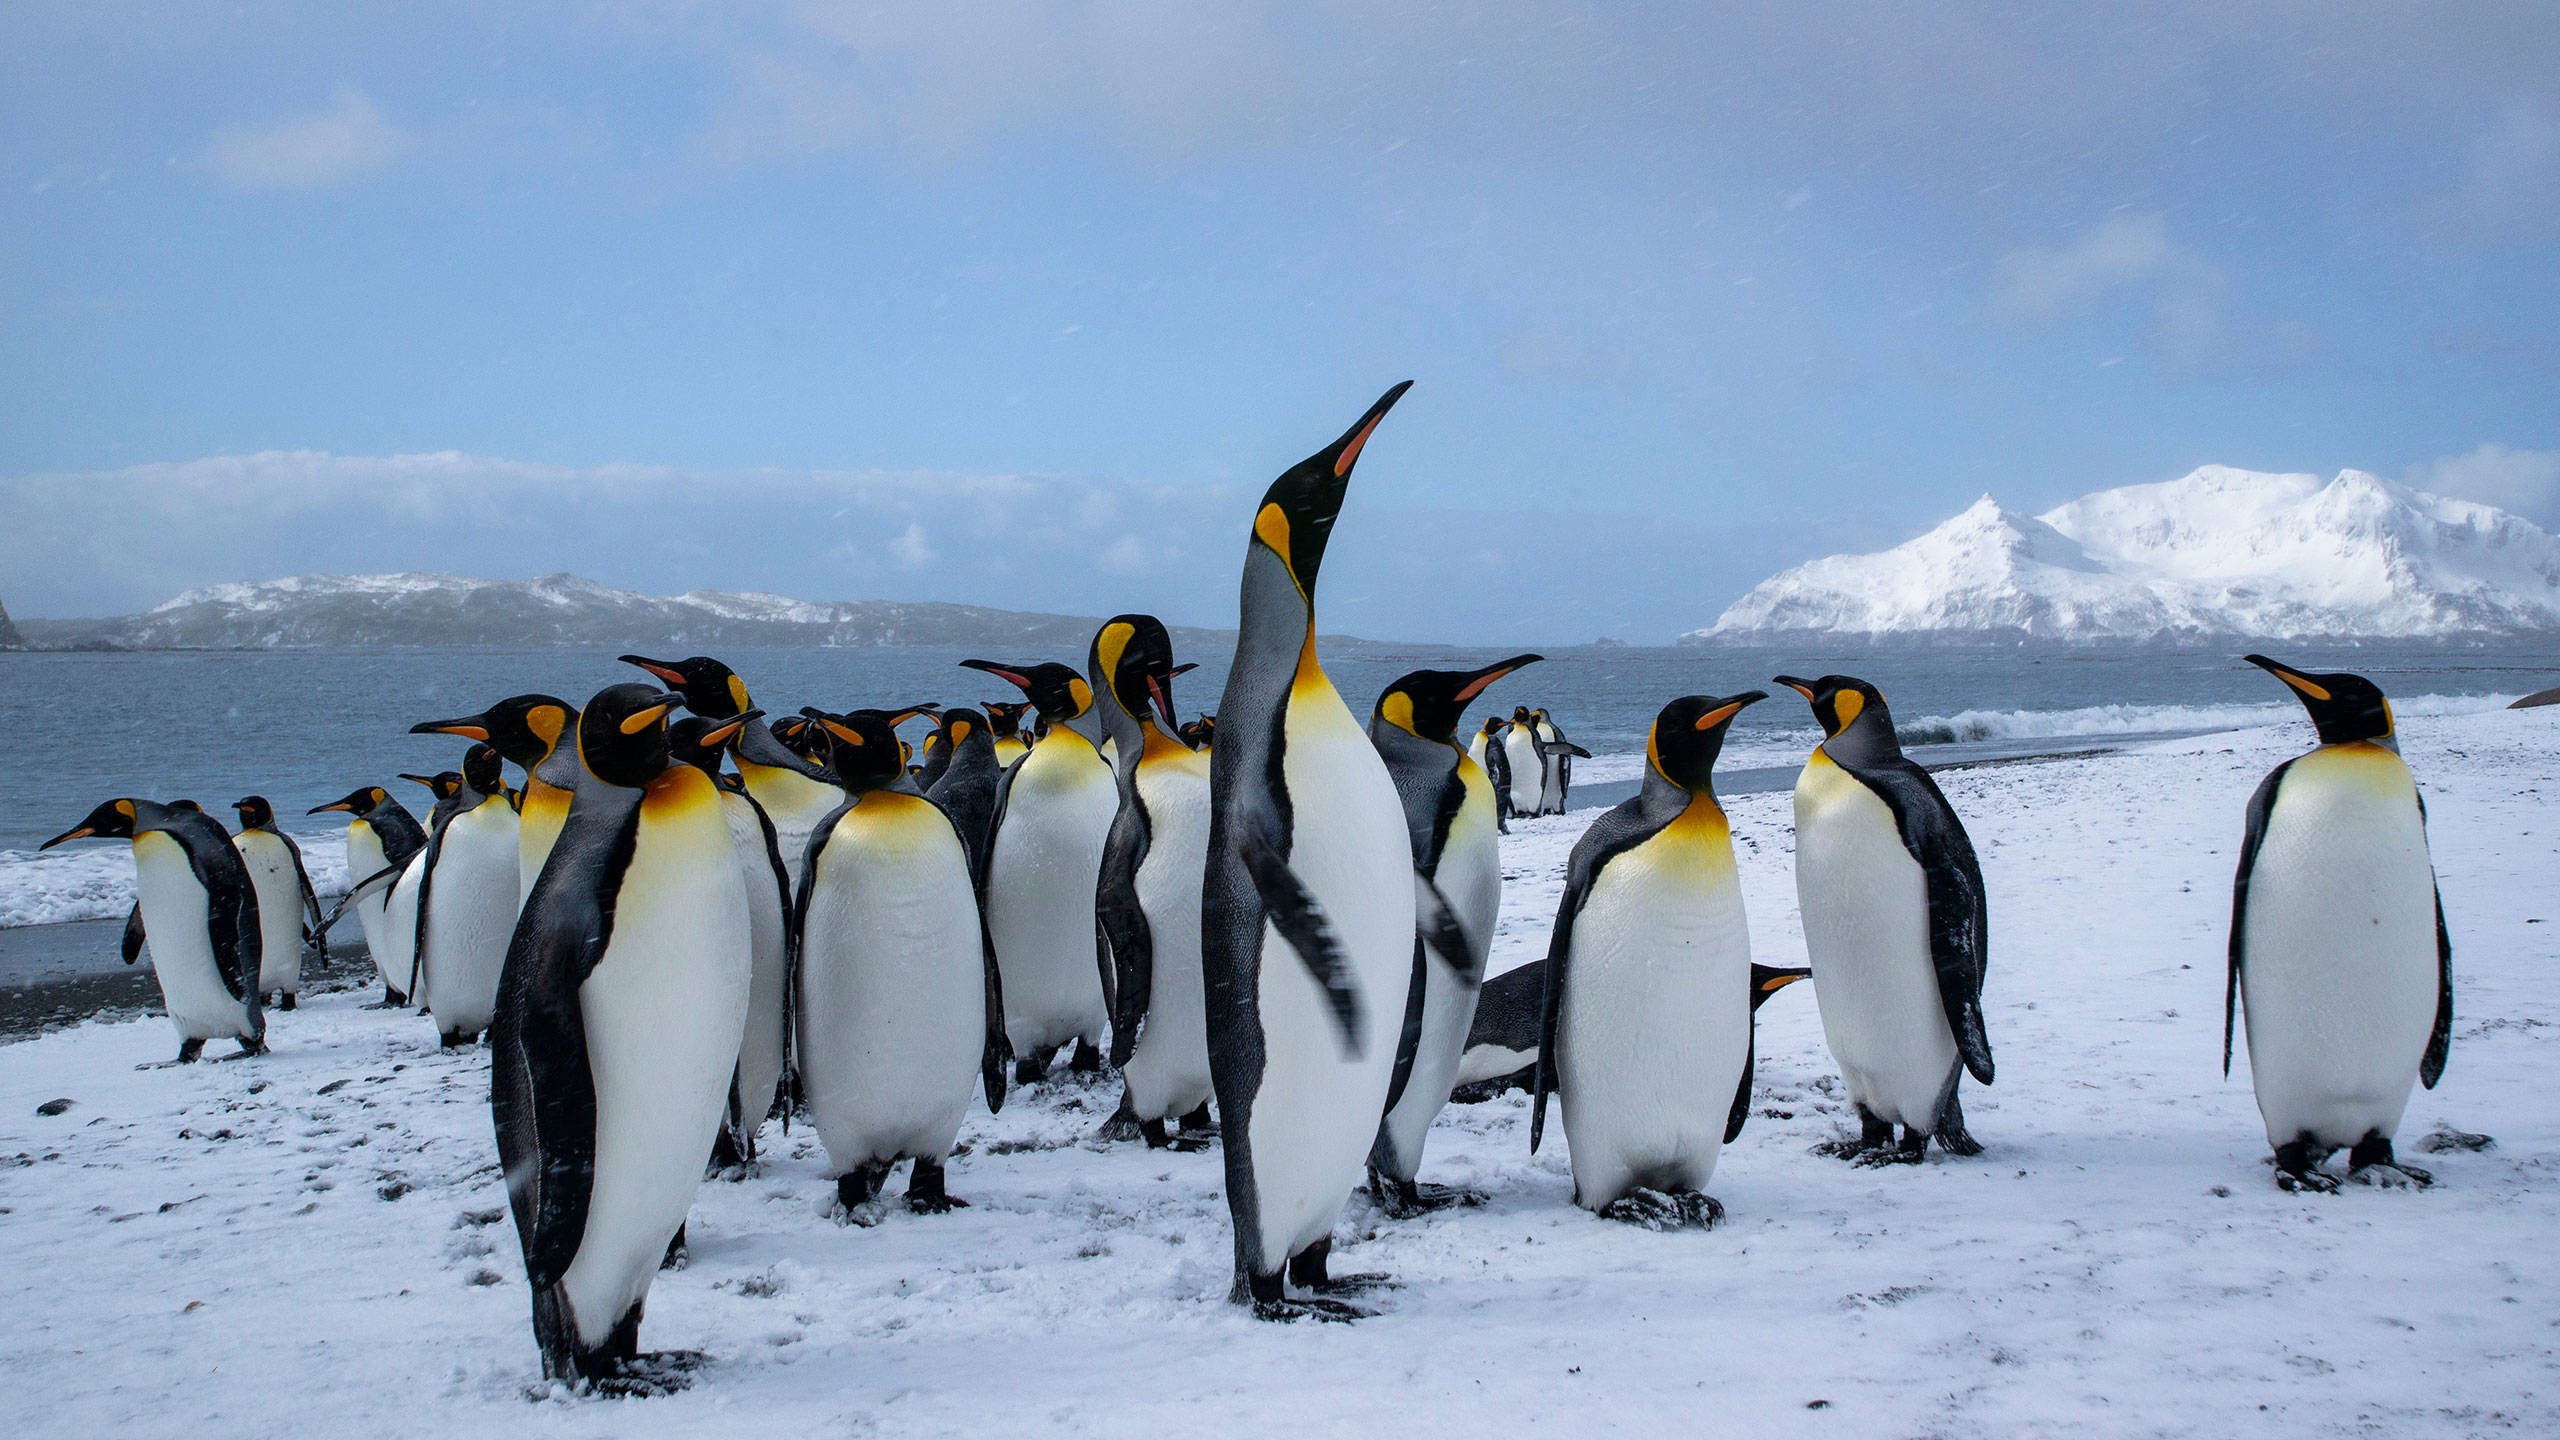 The penguin is one of the toughest creatures in the world and is a sociable bird. It is associated with Jotun in what we call “The penguin spirit”.